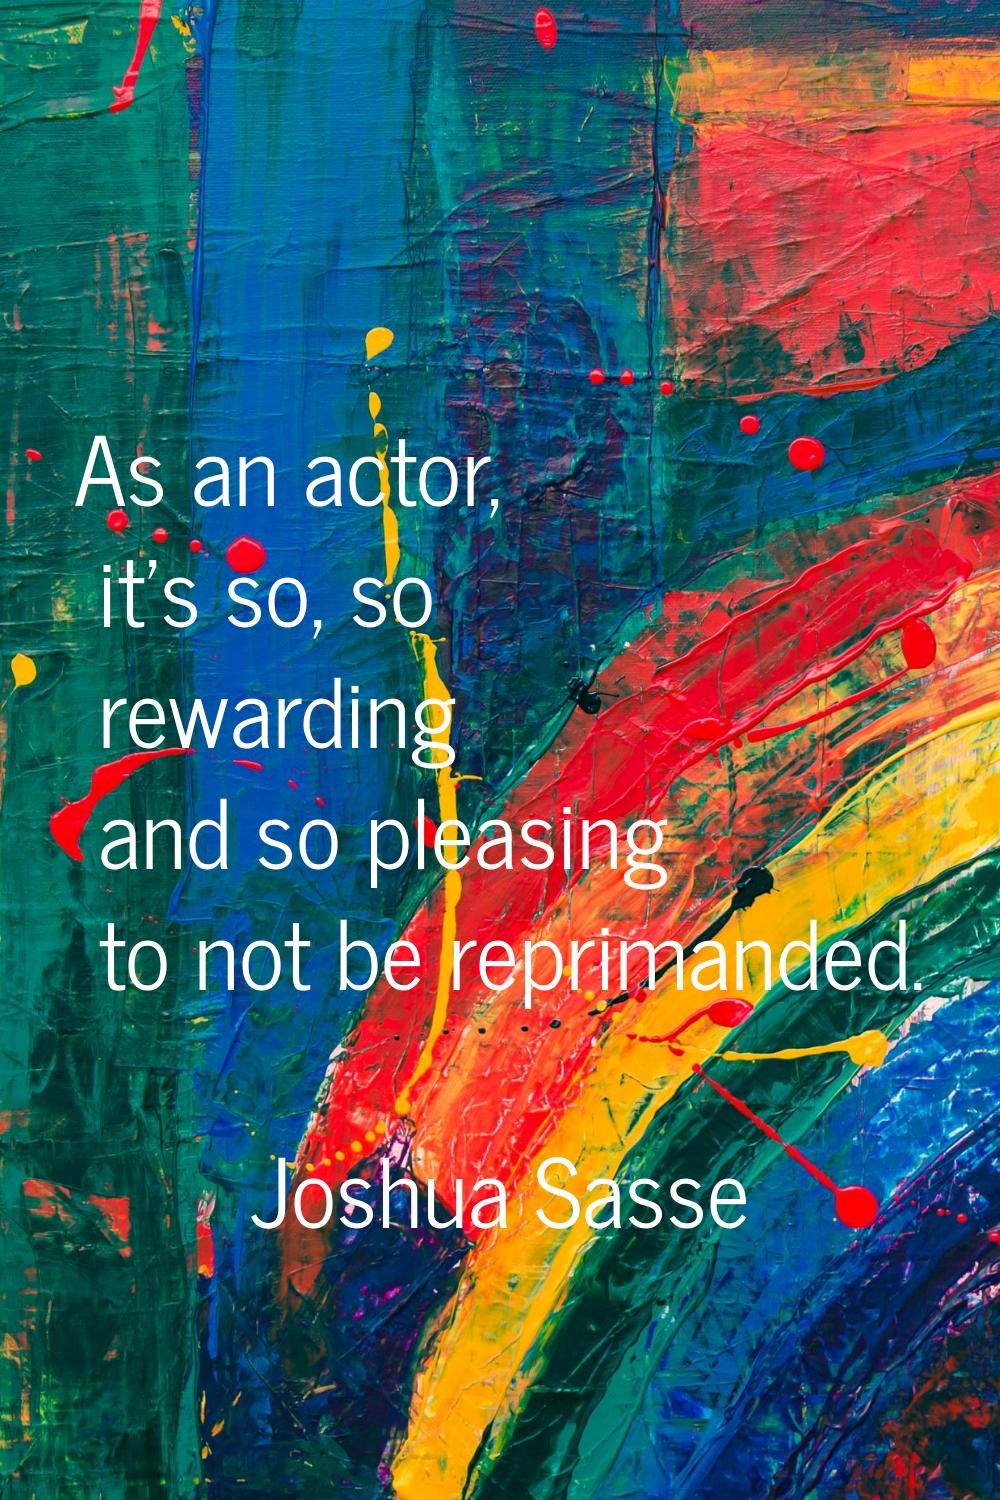 As an actor, it's so, so rewarding and so pleasing to not be reprimanded.